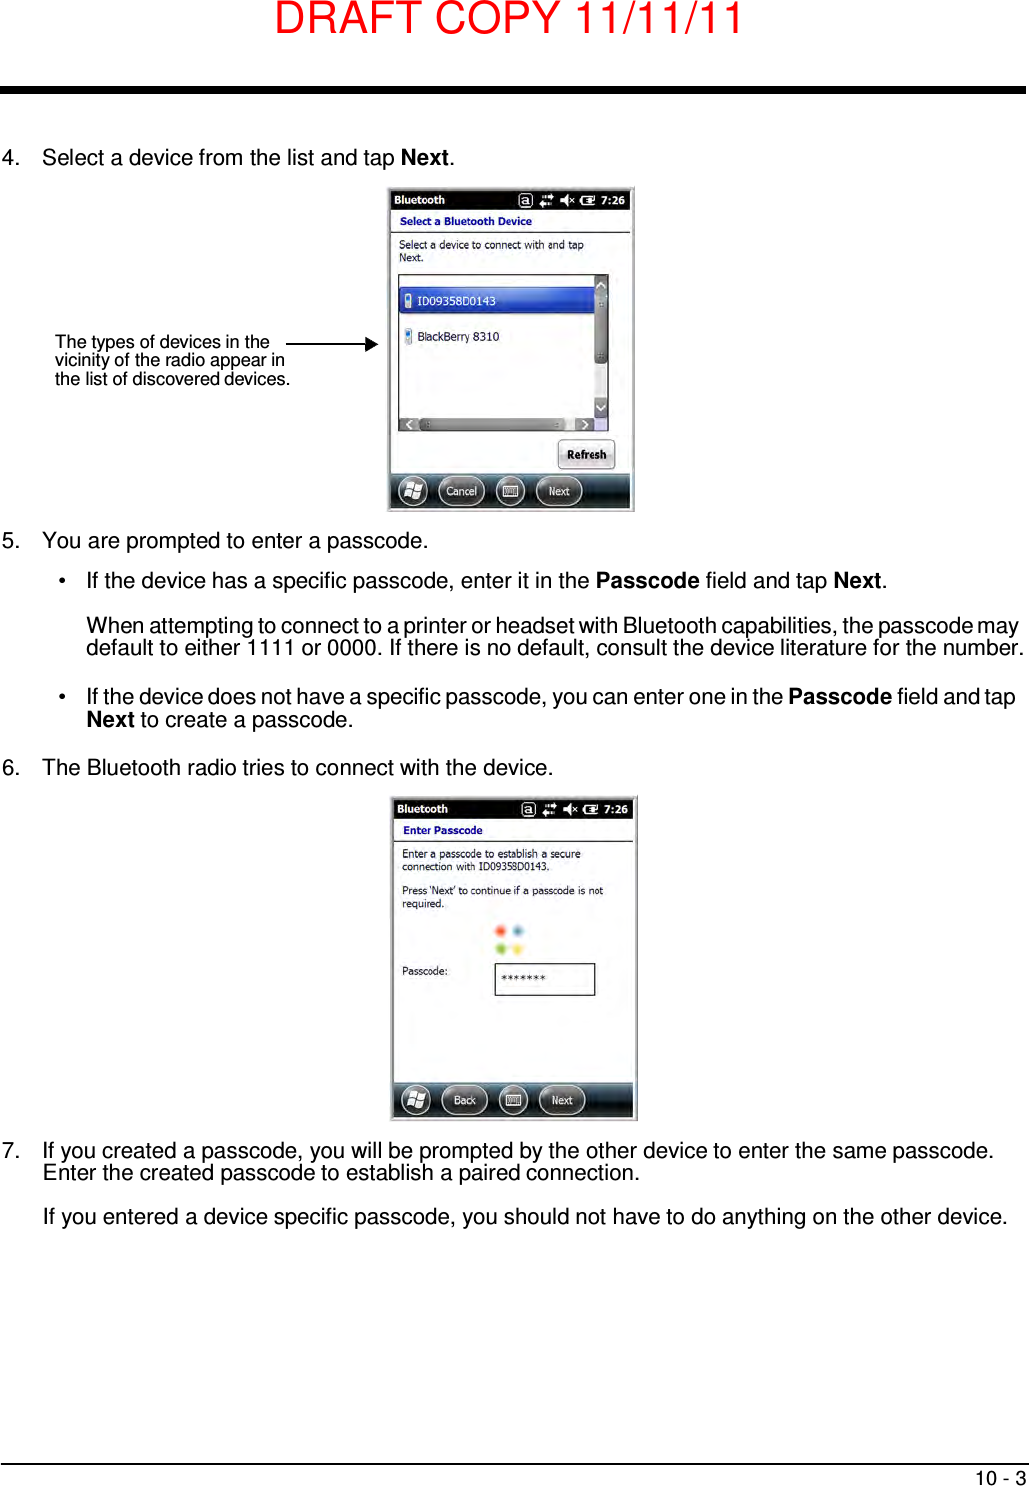 DRAFT COPY 11/11/11 10 - 3       4.  Select a device from the list and tap Next.         The types of devices in the vicinity of the radio appear in the list of discovered devices.        5.  You are prompted to enter a passcode.  •   If the device has a specific passcode, enter it in the Passcode field and tap Next.  When attempting to connect to a printer or headset with Bluetooth capabilities, the passcode may default to either 1111 or 0000. If there is no default, consult the device literature for the number.  •   If the device does not have a specific passcode, you can enter one in the Passcode field and tap Next to create a passcode.  6.  The Bluetooth radio tries to connect with the device.                   7.  If you created a passcode, you will be prompted by the other device to enter the same passcode. Enter the created passcode to establish a paired connection.  If you entered a device specific passcode, you should not have to do anything on the other device. 